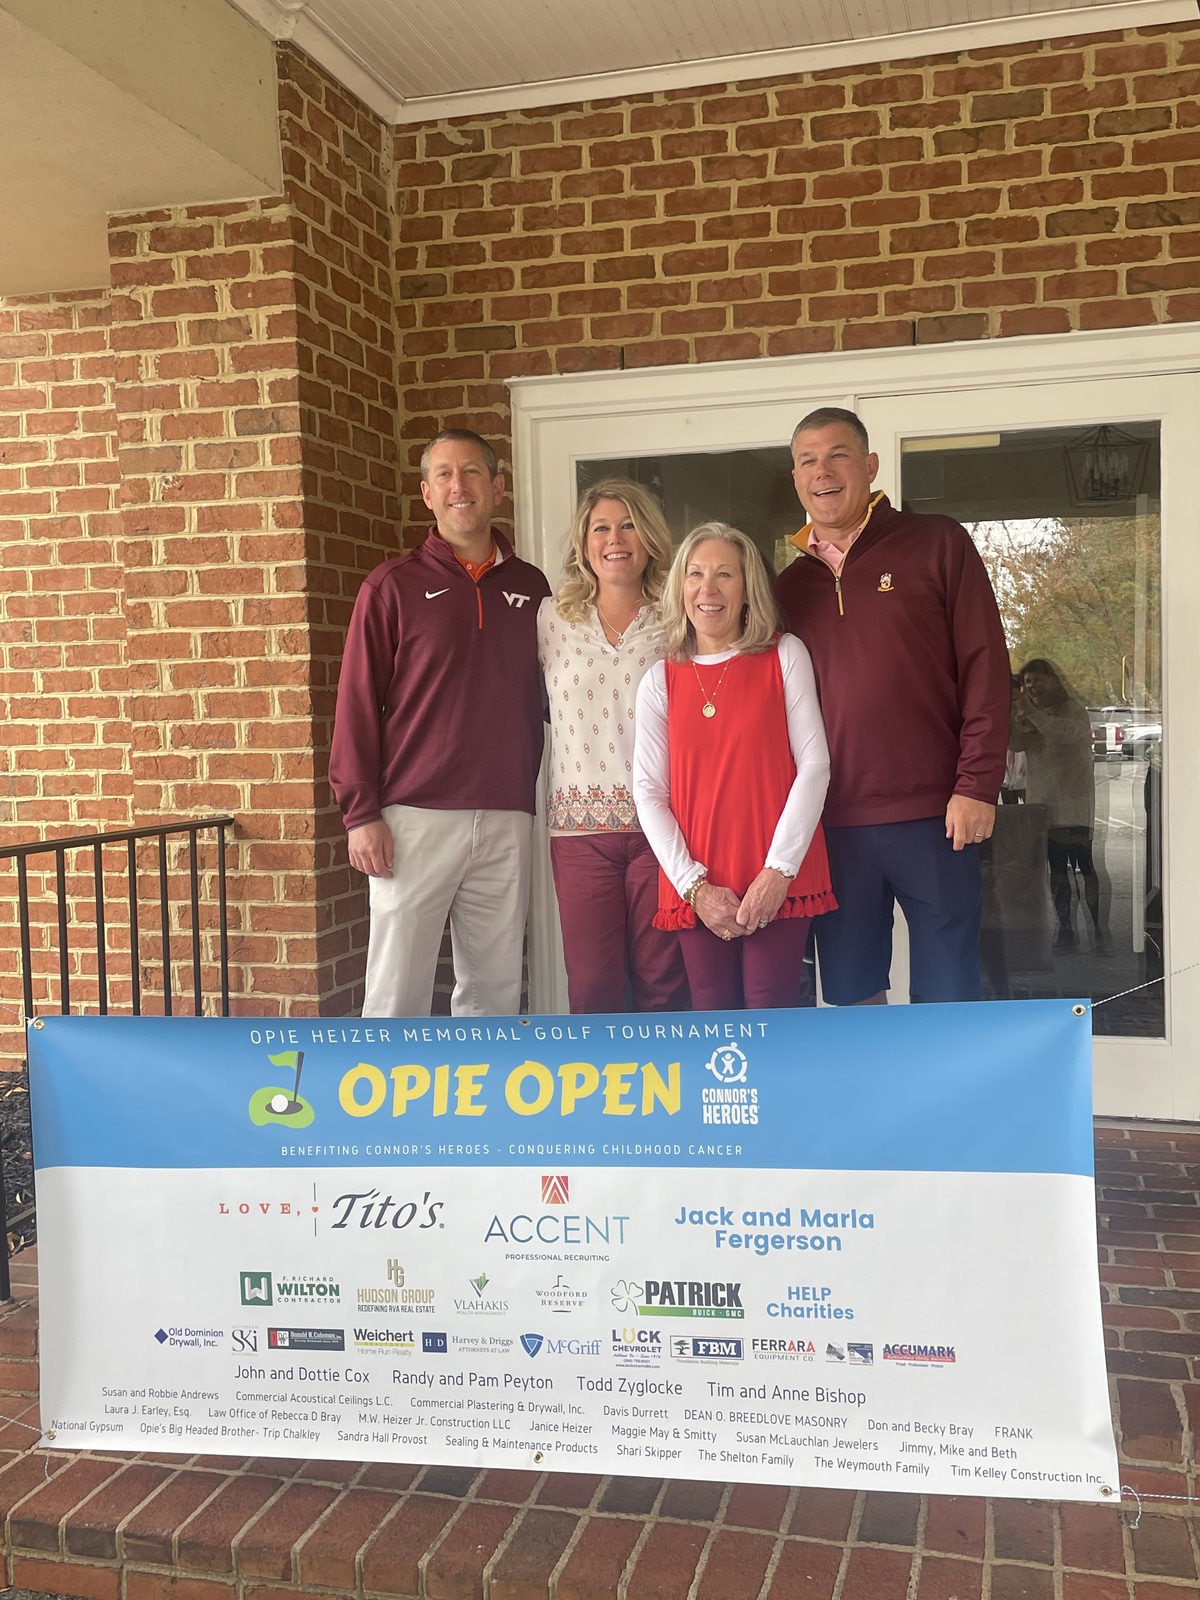 Four people standing together in front of a banner Opie Open